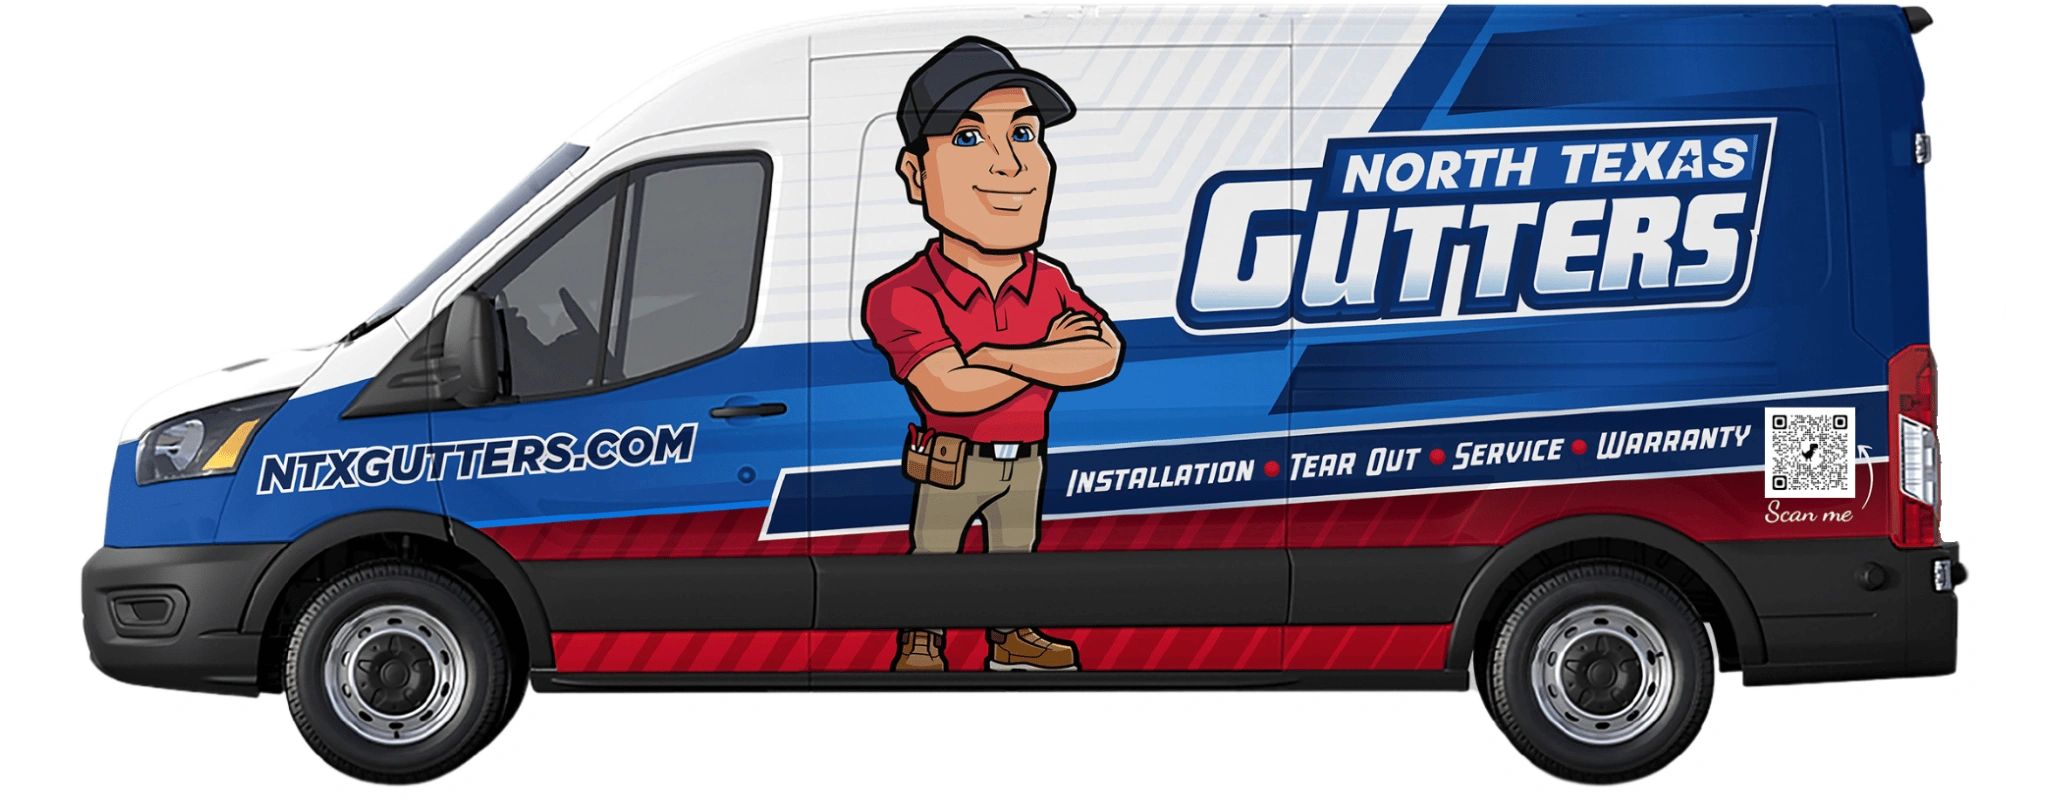 North Texas Gutters Van Wrapped - Installation, Tear Out gutter service and warranty 